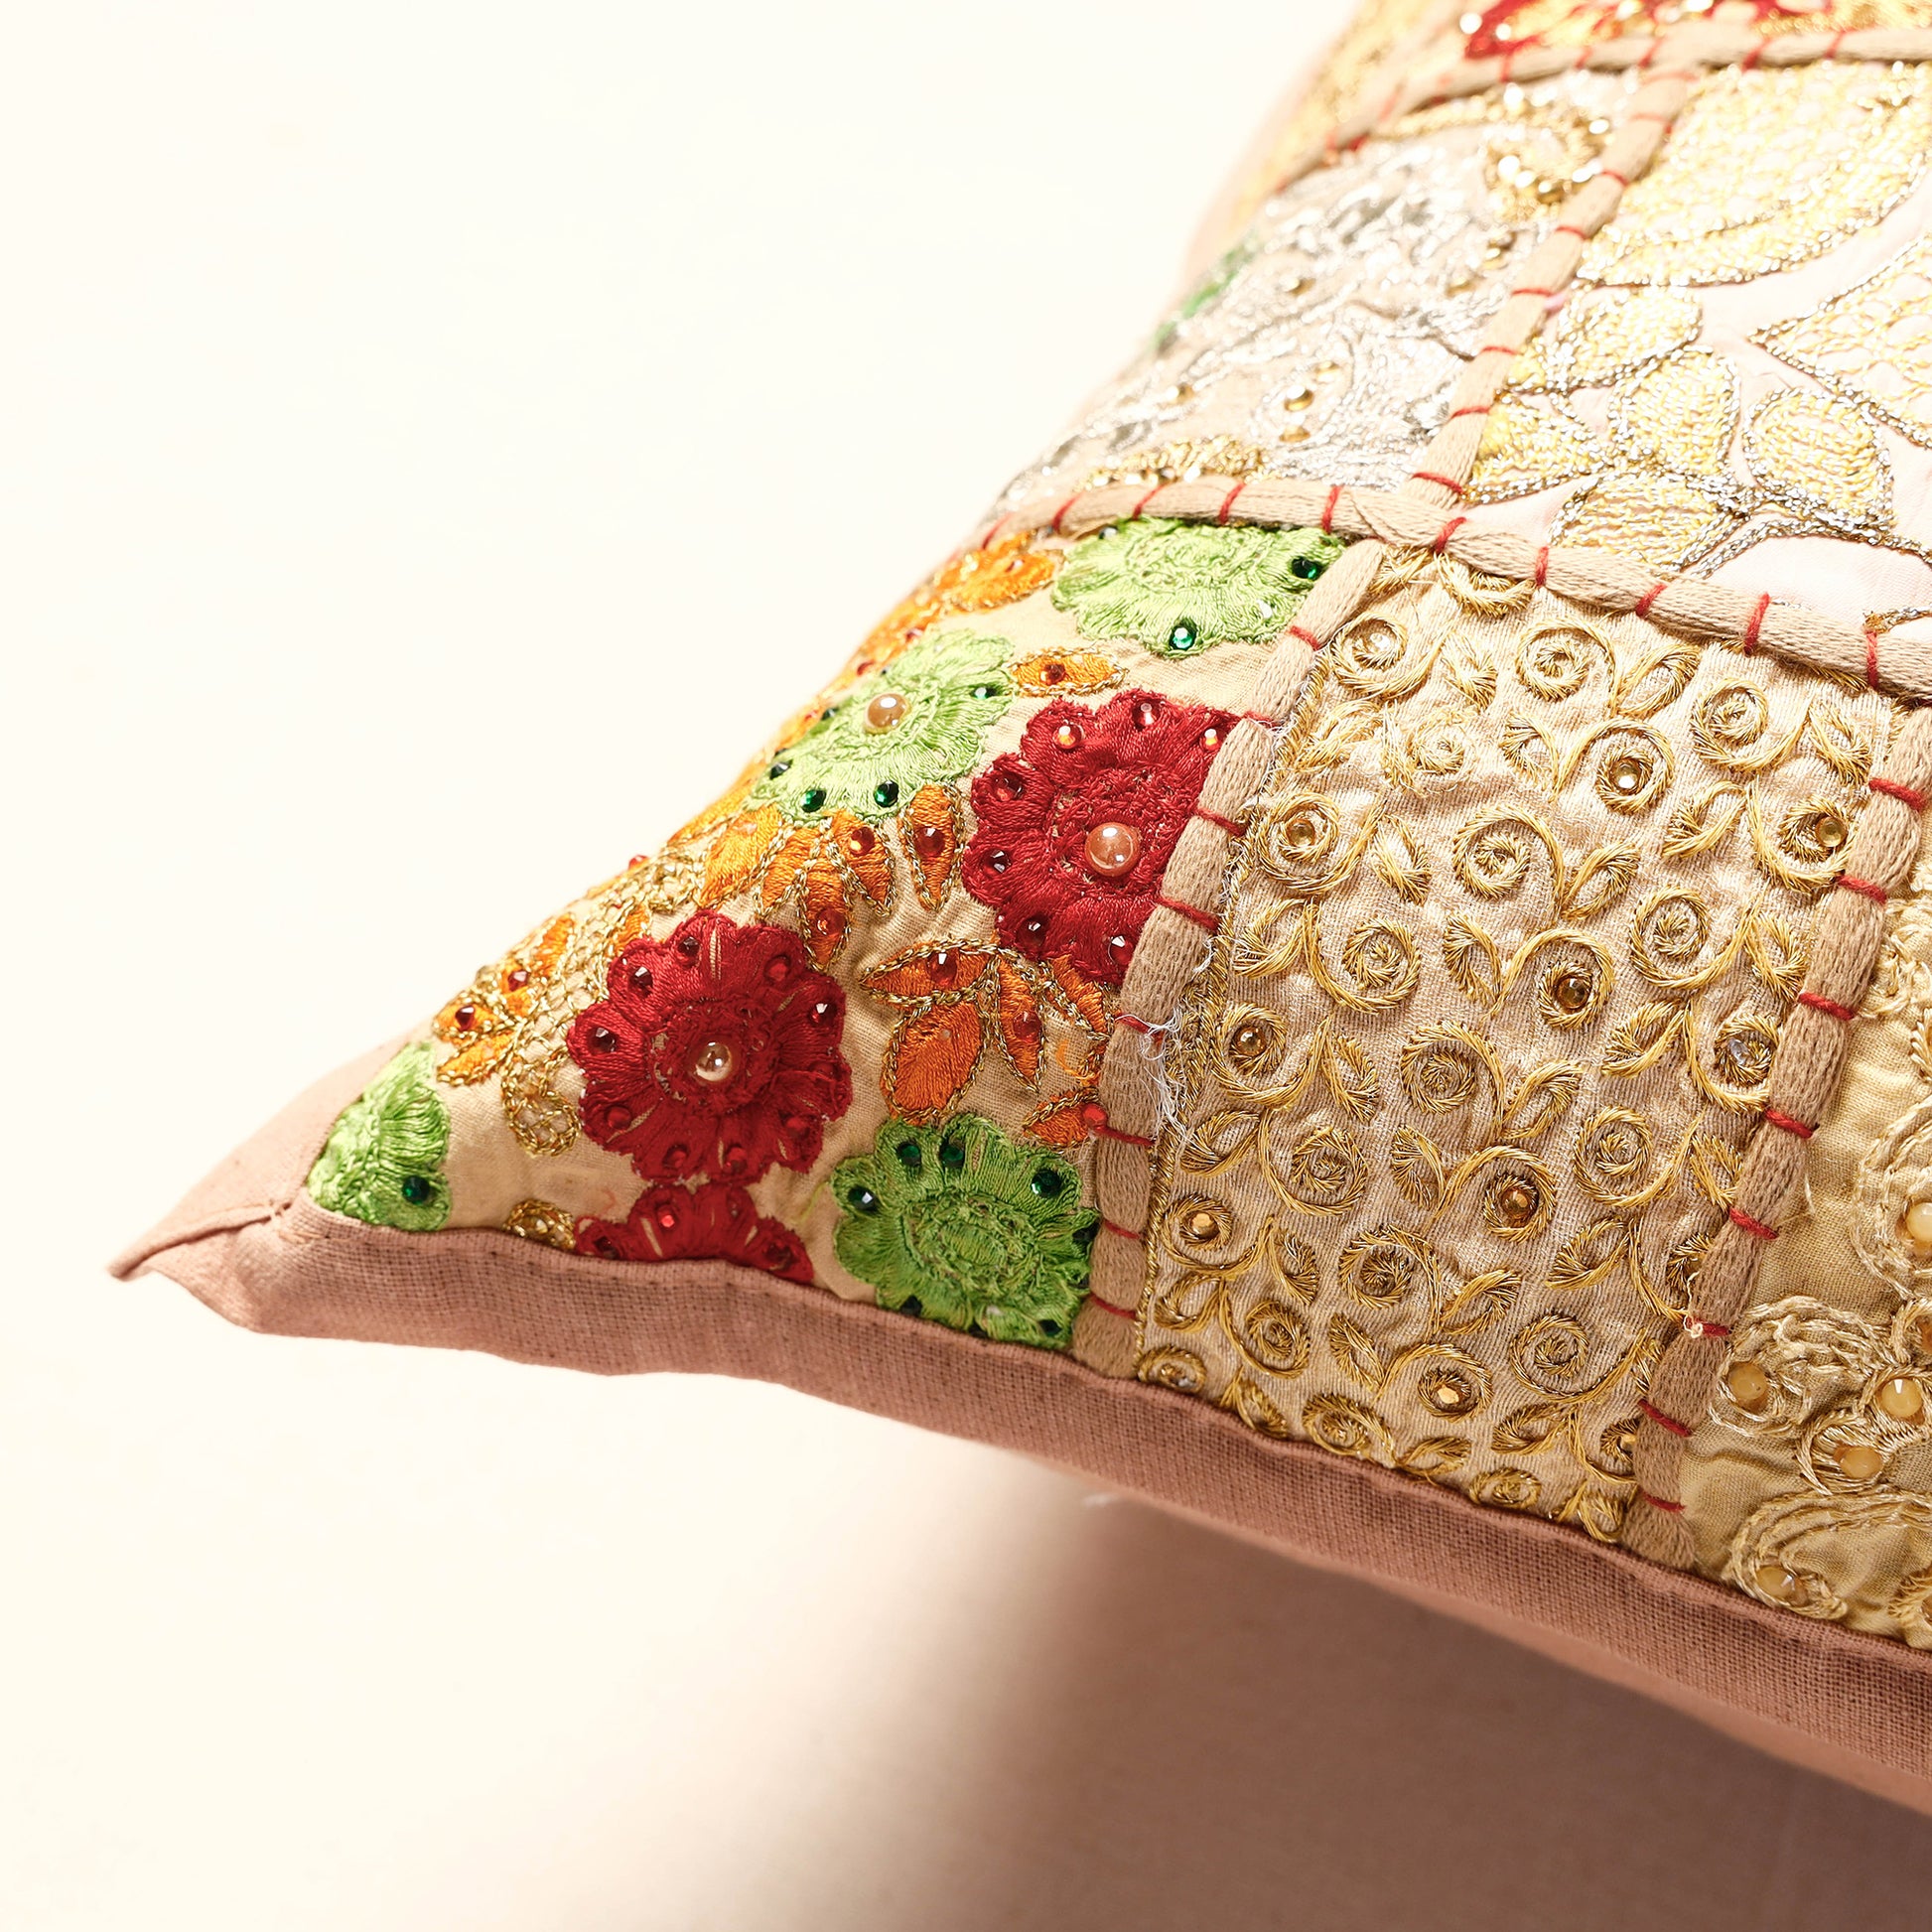 patchwork pillow cover